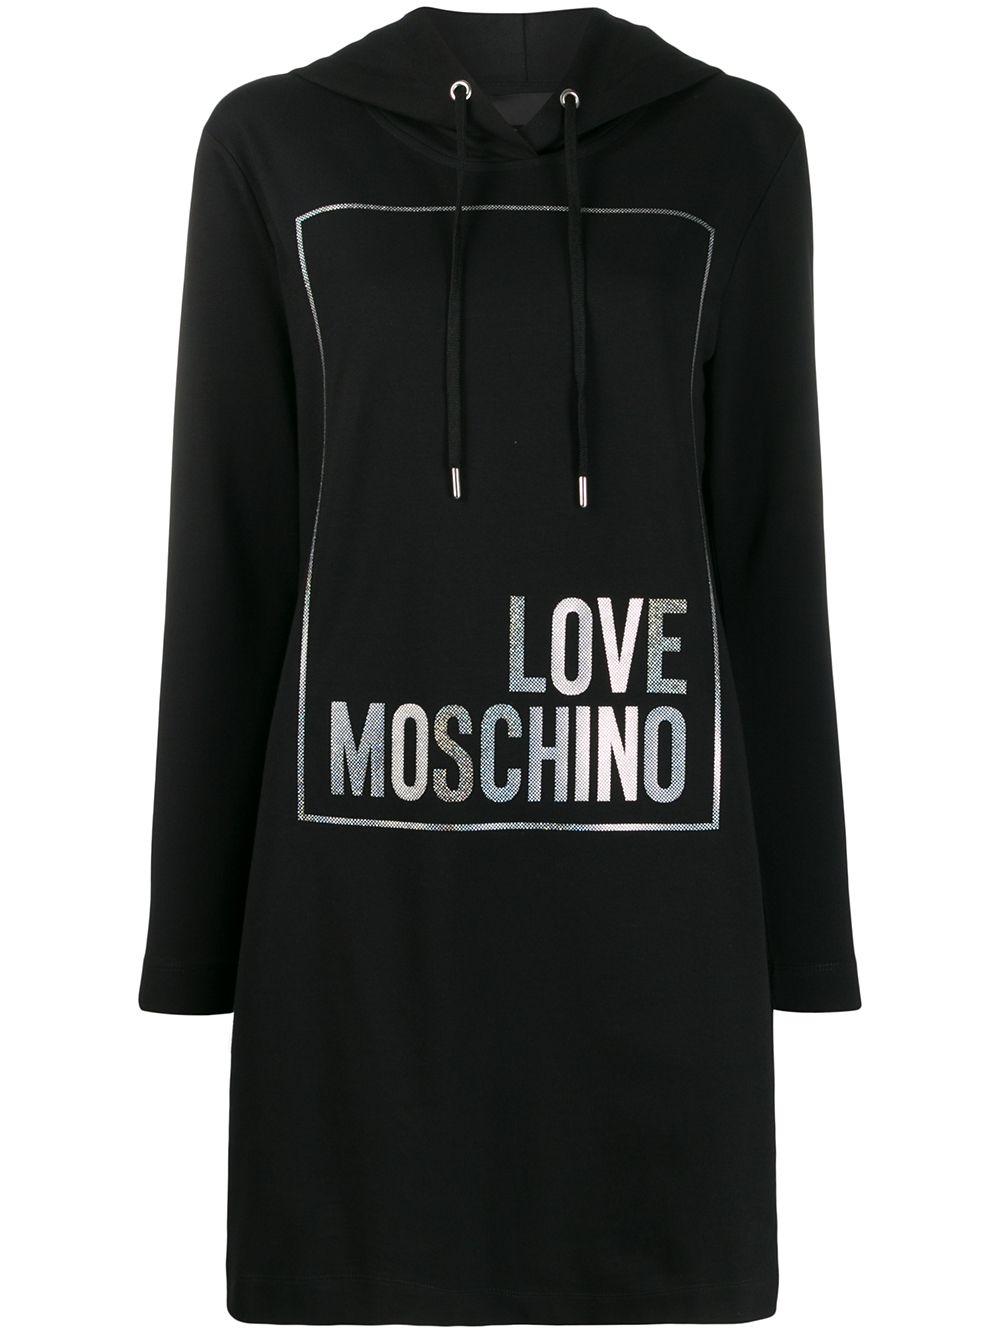 Love Moschino Synthetic Logo Hoodie in Black - Lyst